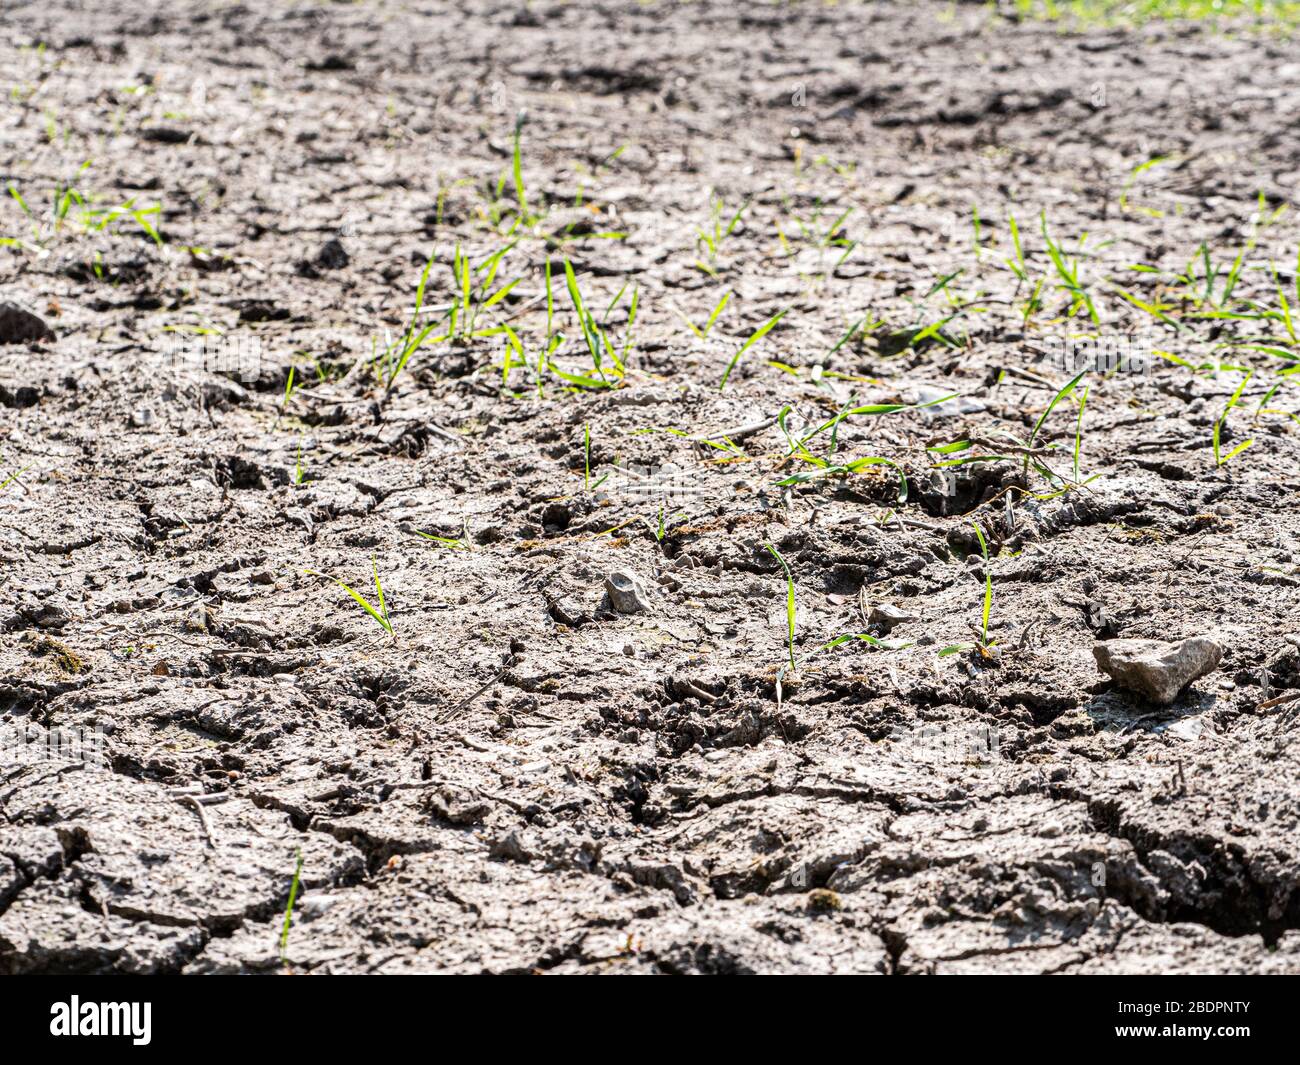 Dried, cracked earth with sparse growth of Common wheat (Triticum aestivum) in Wiltshire, UK. Stock Photo